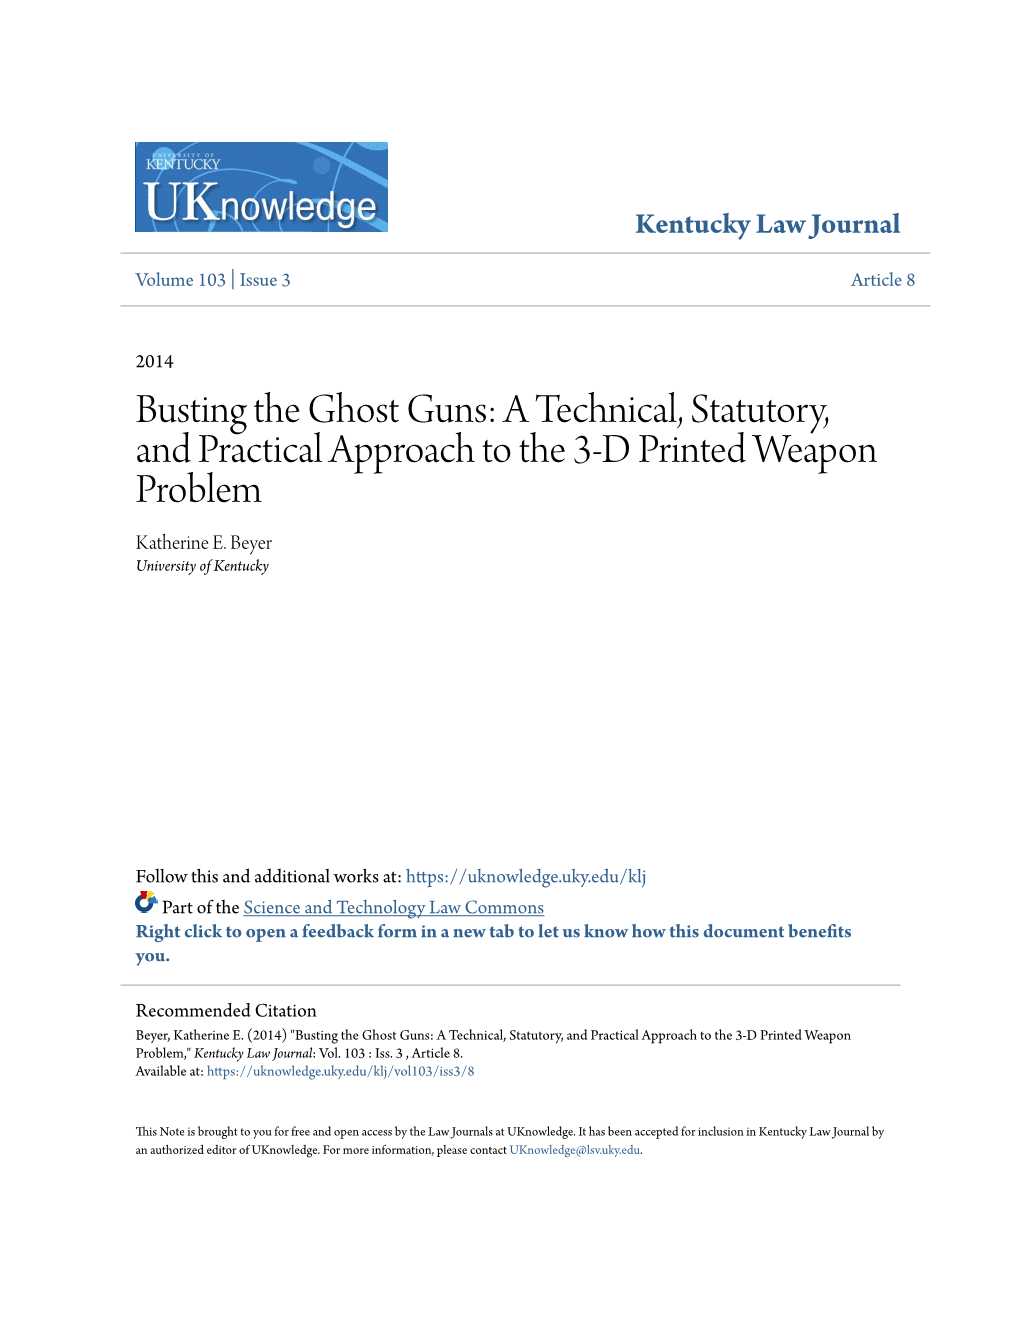 Busting the Ghost Guns: a Technical, Statutory, and Practical Approach to the 3-D Printed Weapon Problem Katherine E